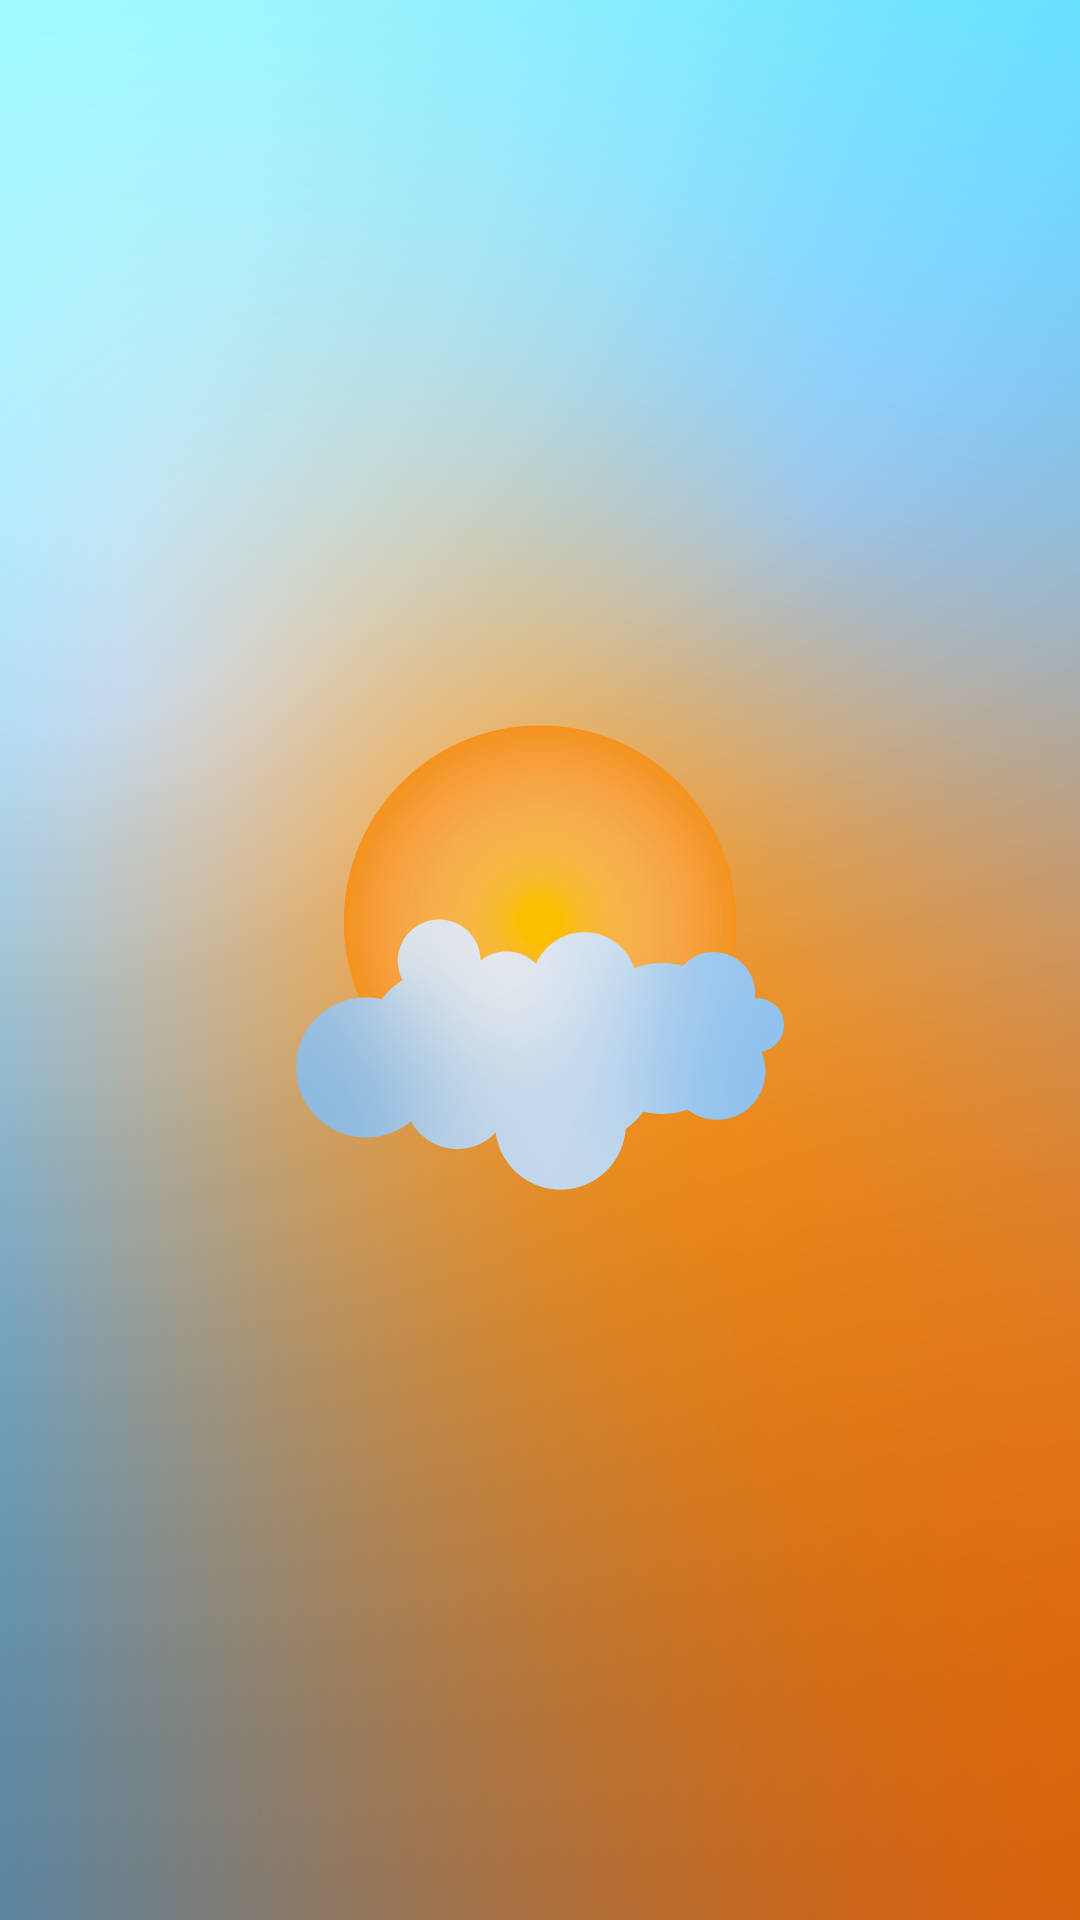 Stay connected with Clouds Phone Wallpaper